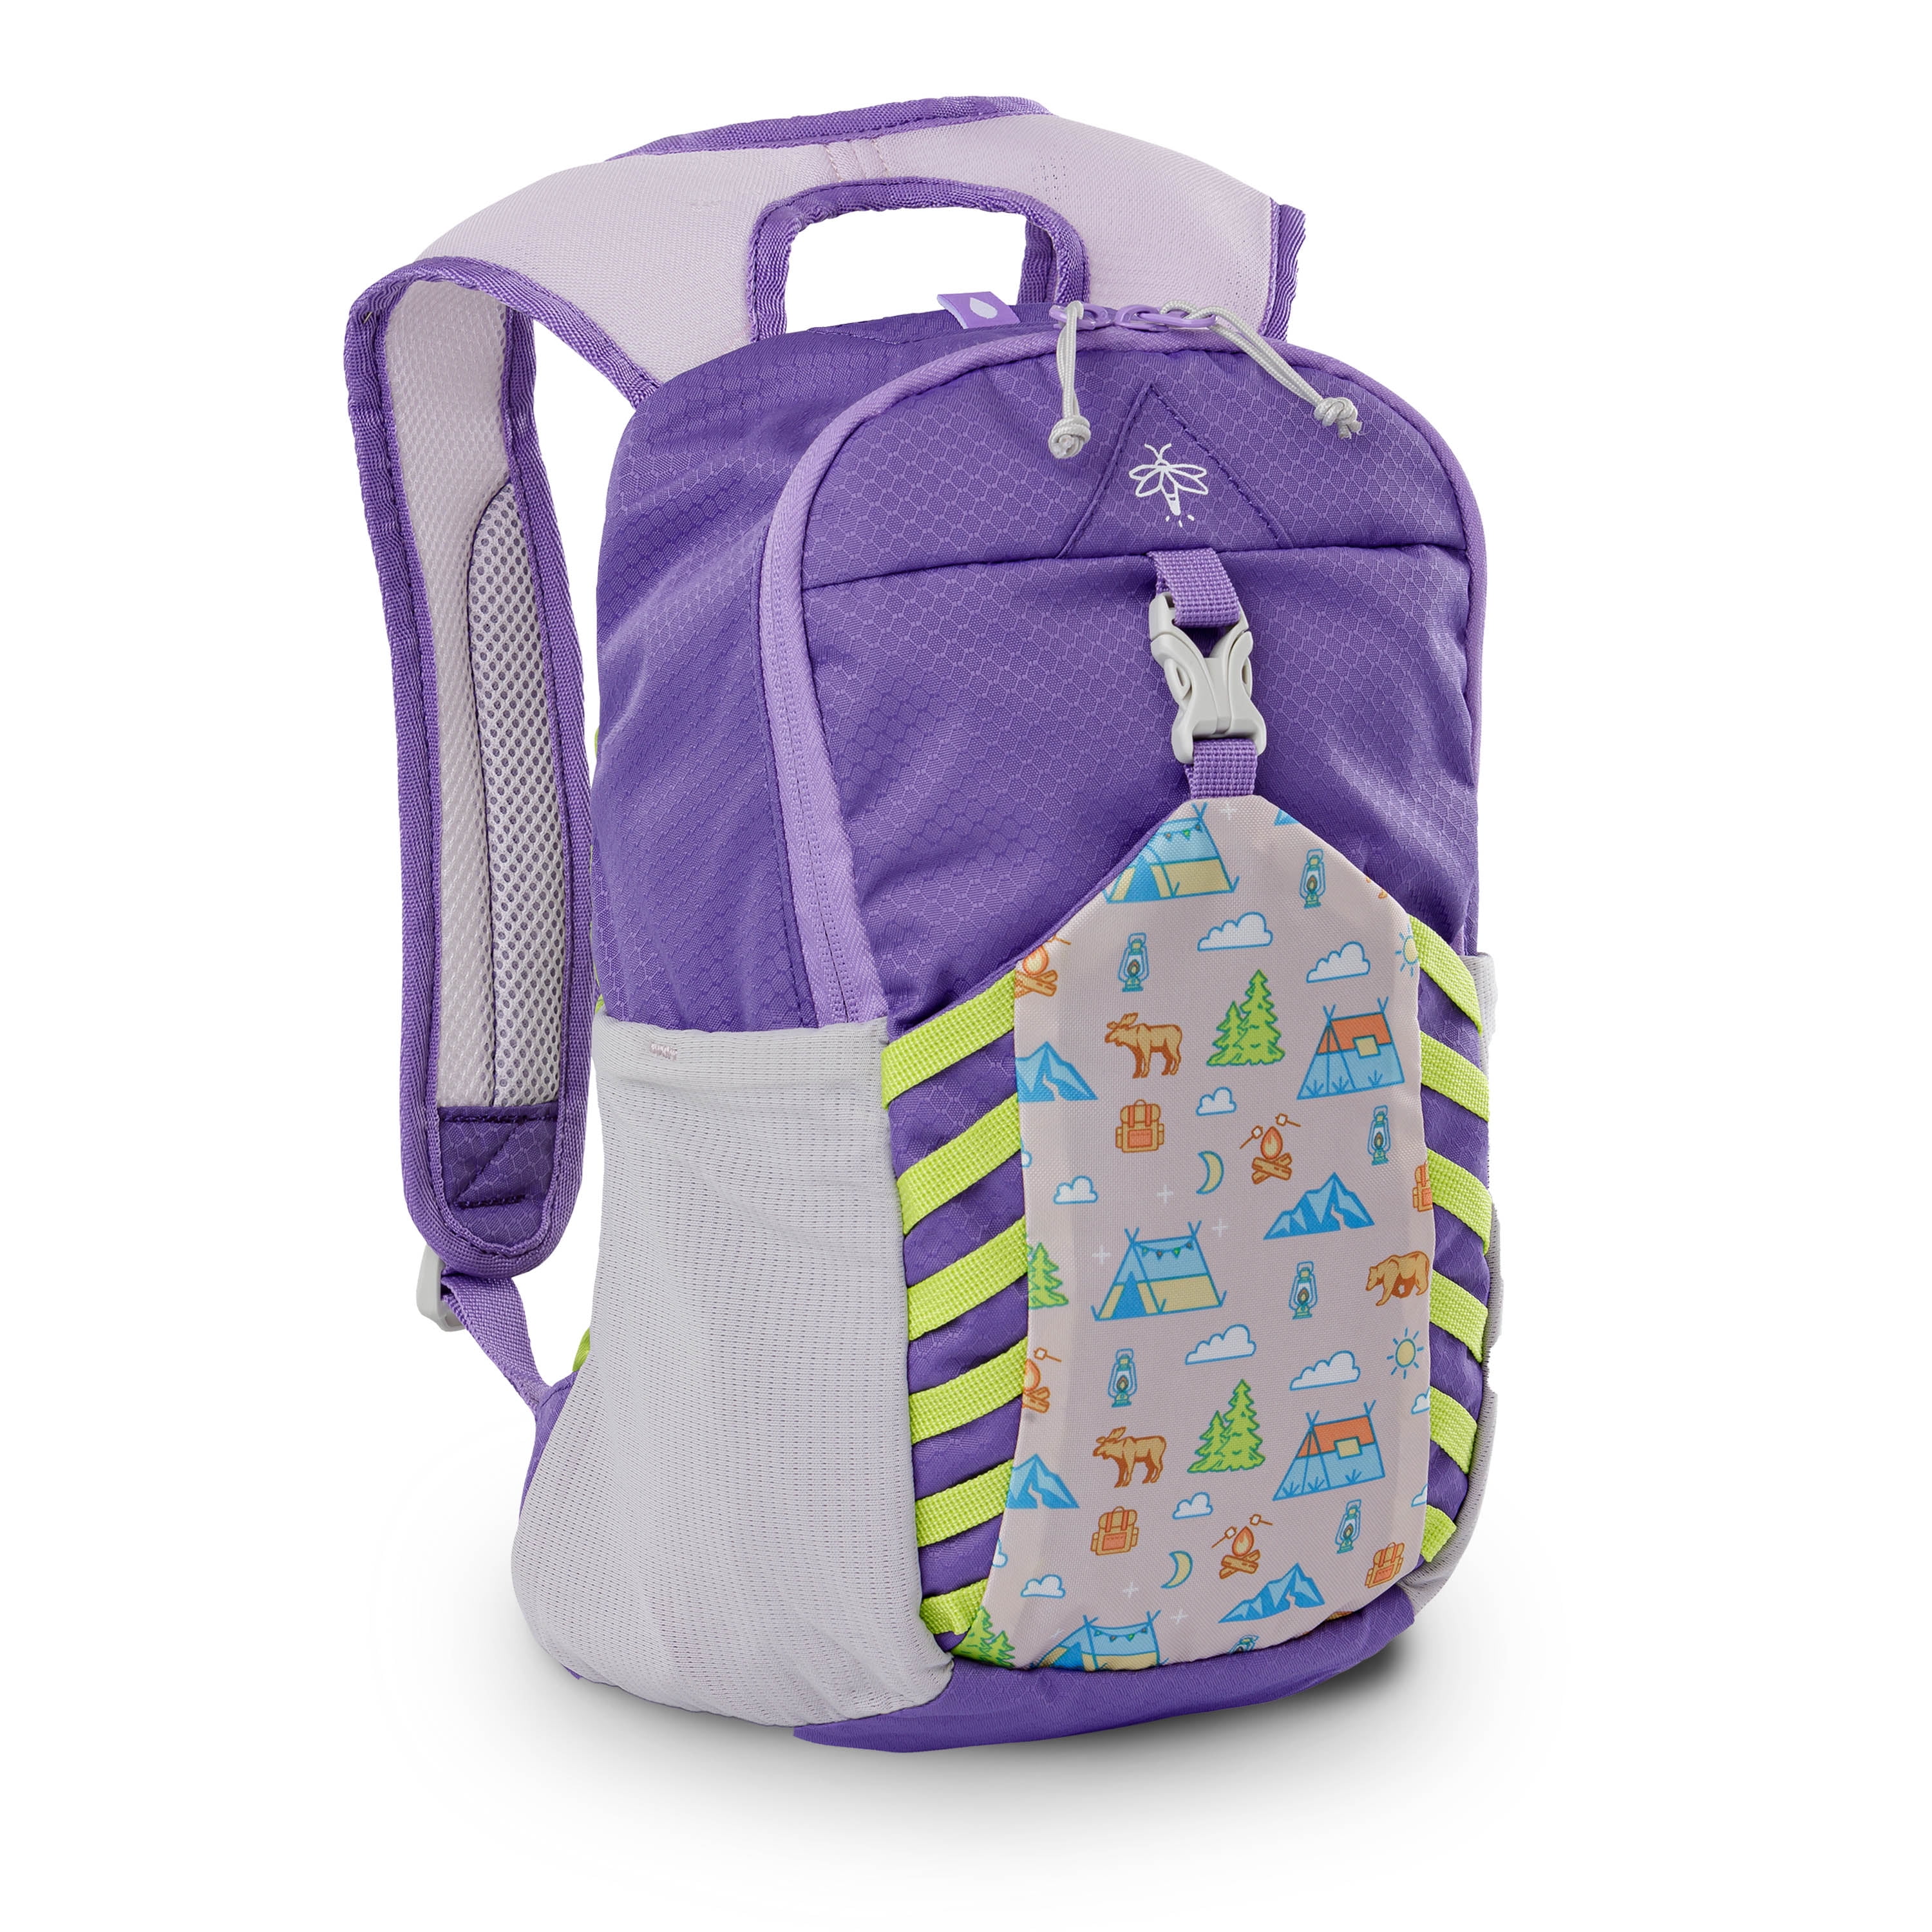 Firefly! Outdoor Gear Youth Outdoor Camping Backpack - Purple (10 Liter), Kids  Backpack - Walmart.com